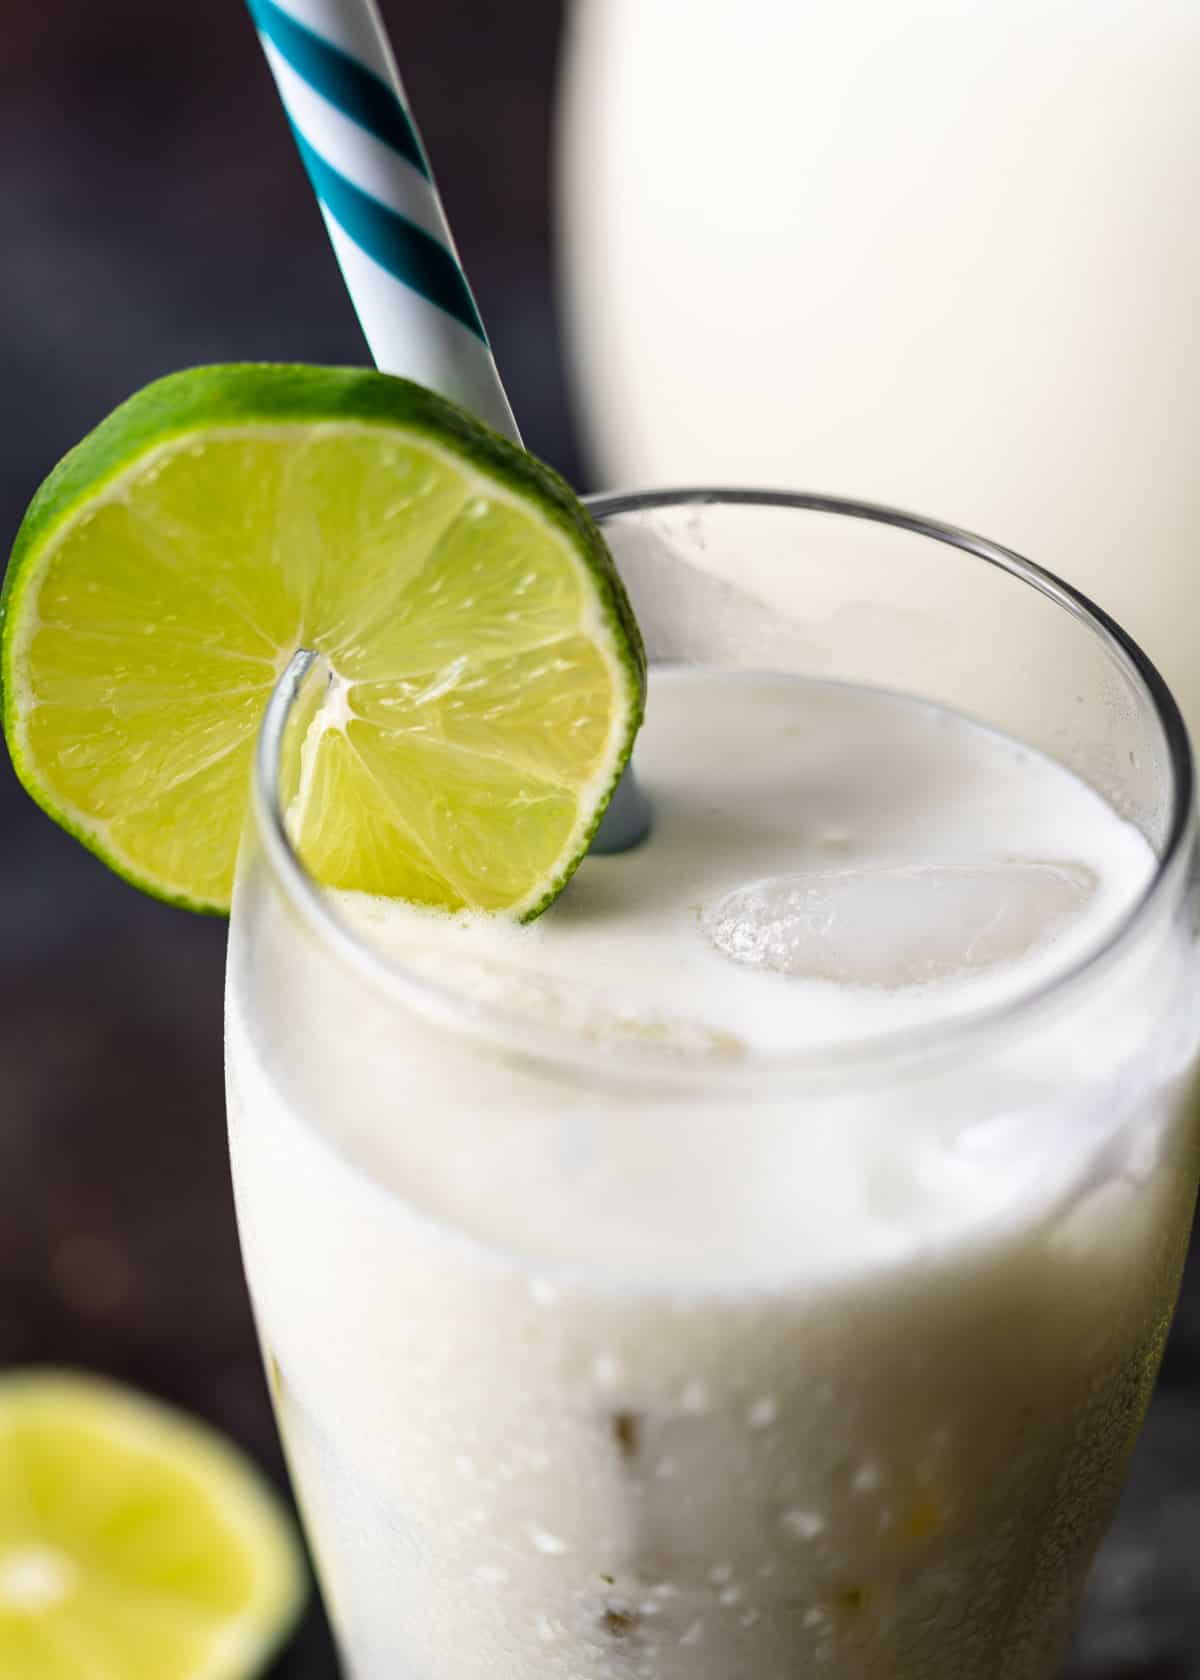 closeup: a cold glass of Brazilian lemonade with a lime round and a blue and white straw